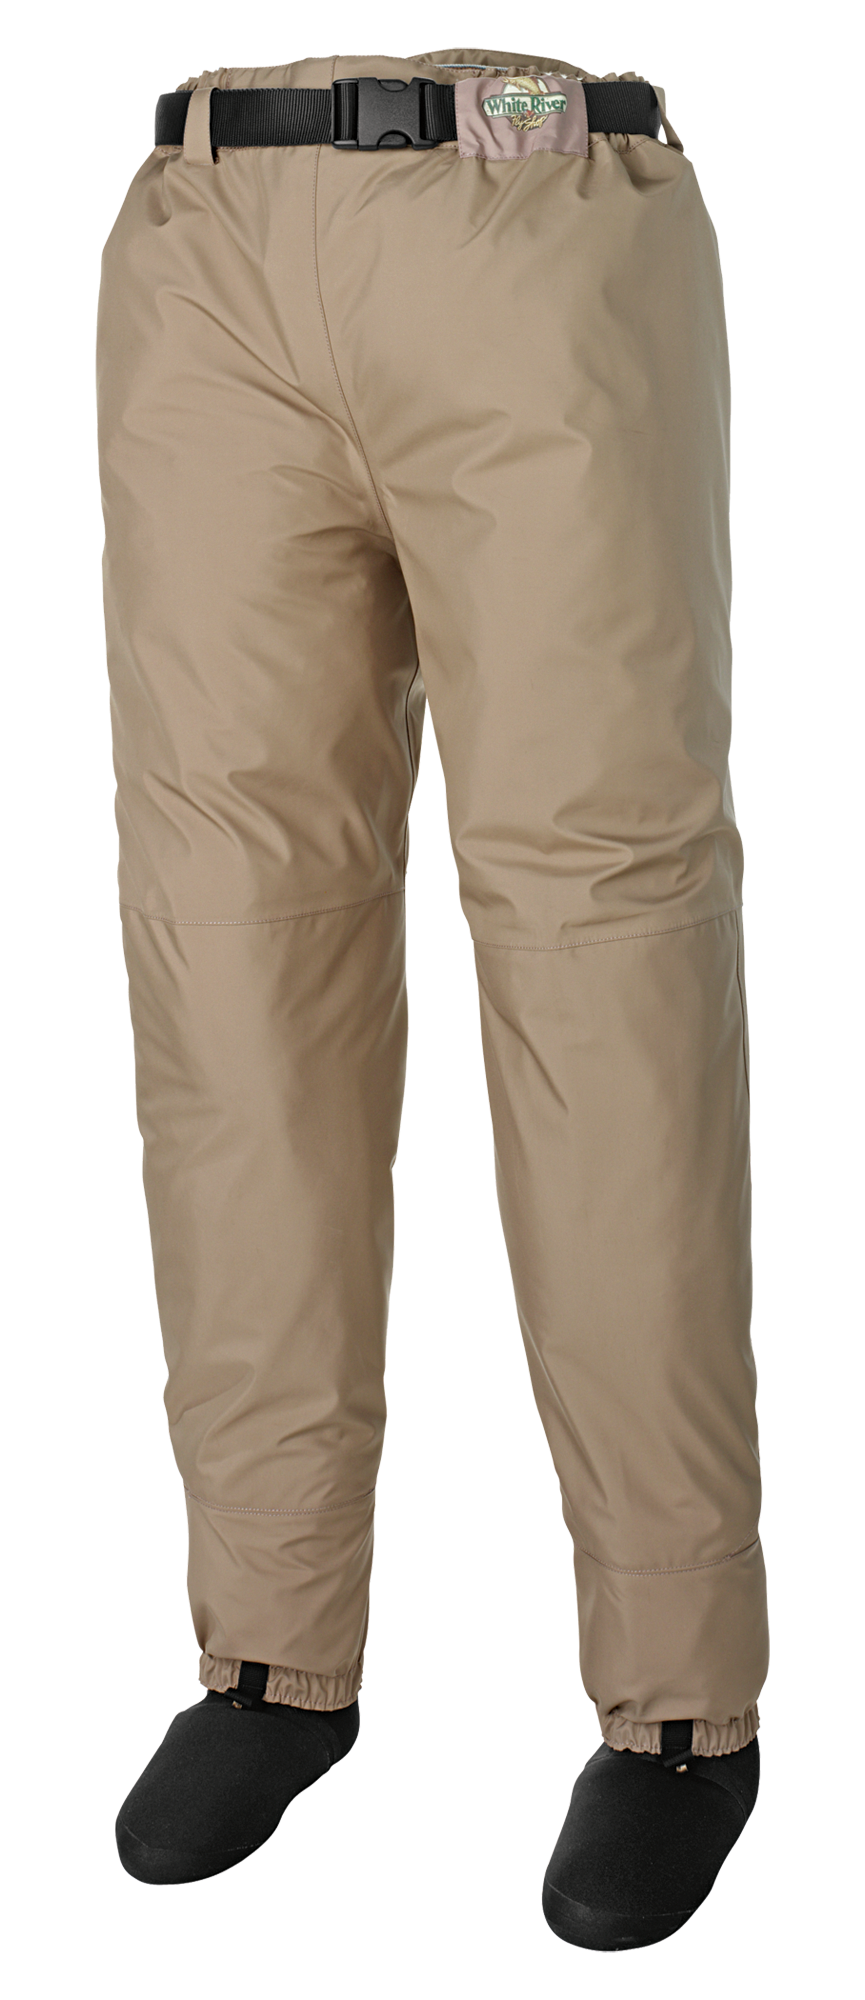 White River Fly Shop Classic Waist-High Stocking-Foot Breathable Wading  Pants for Men